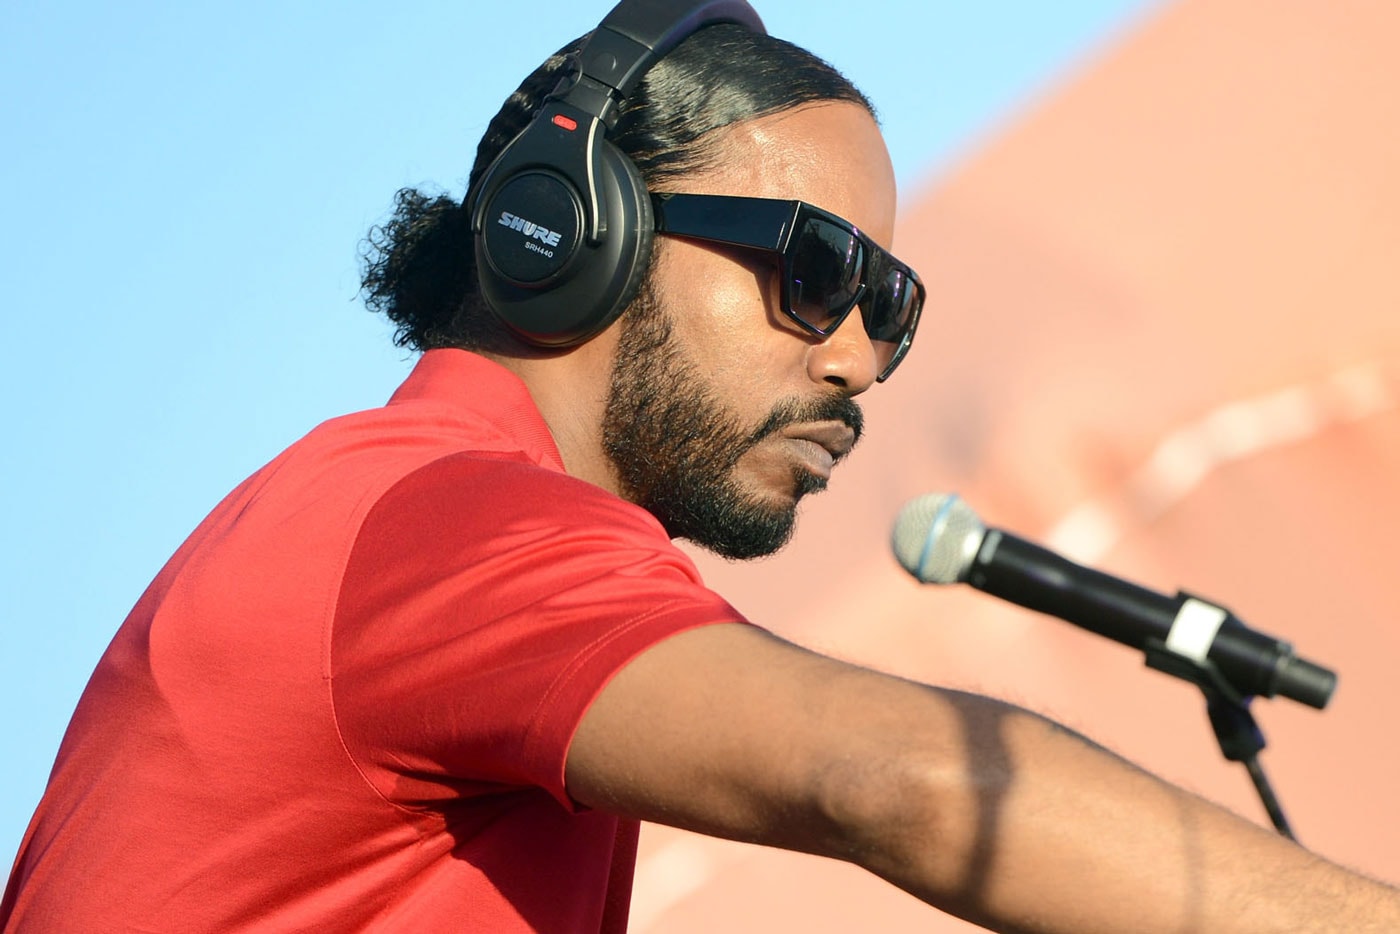 Dam-Funk Unearths More Gems From His Cassette Days